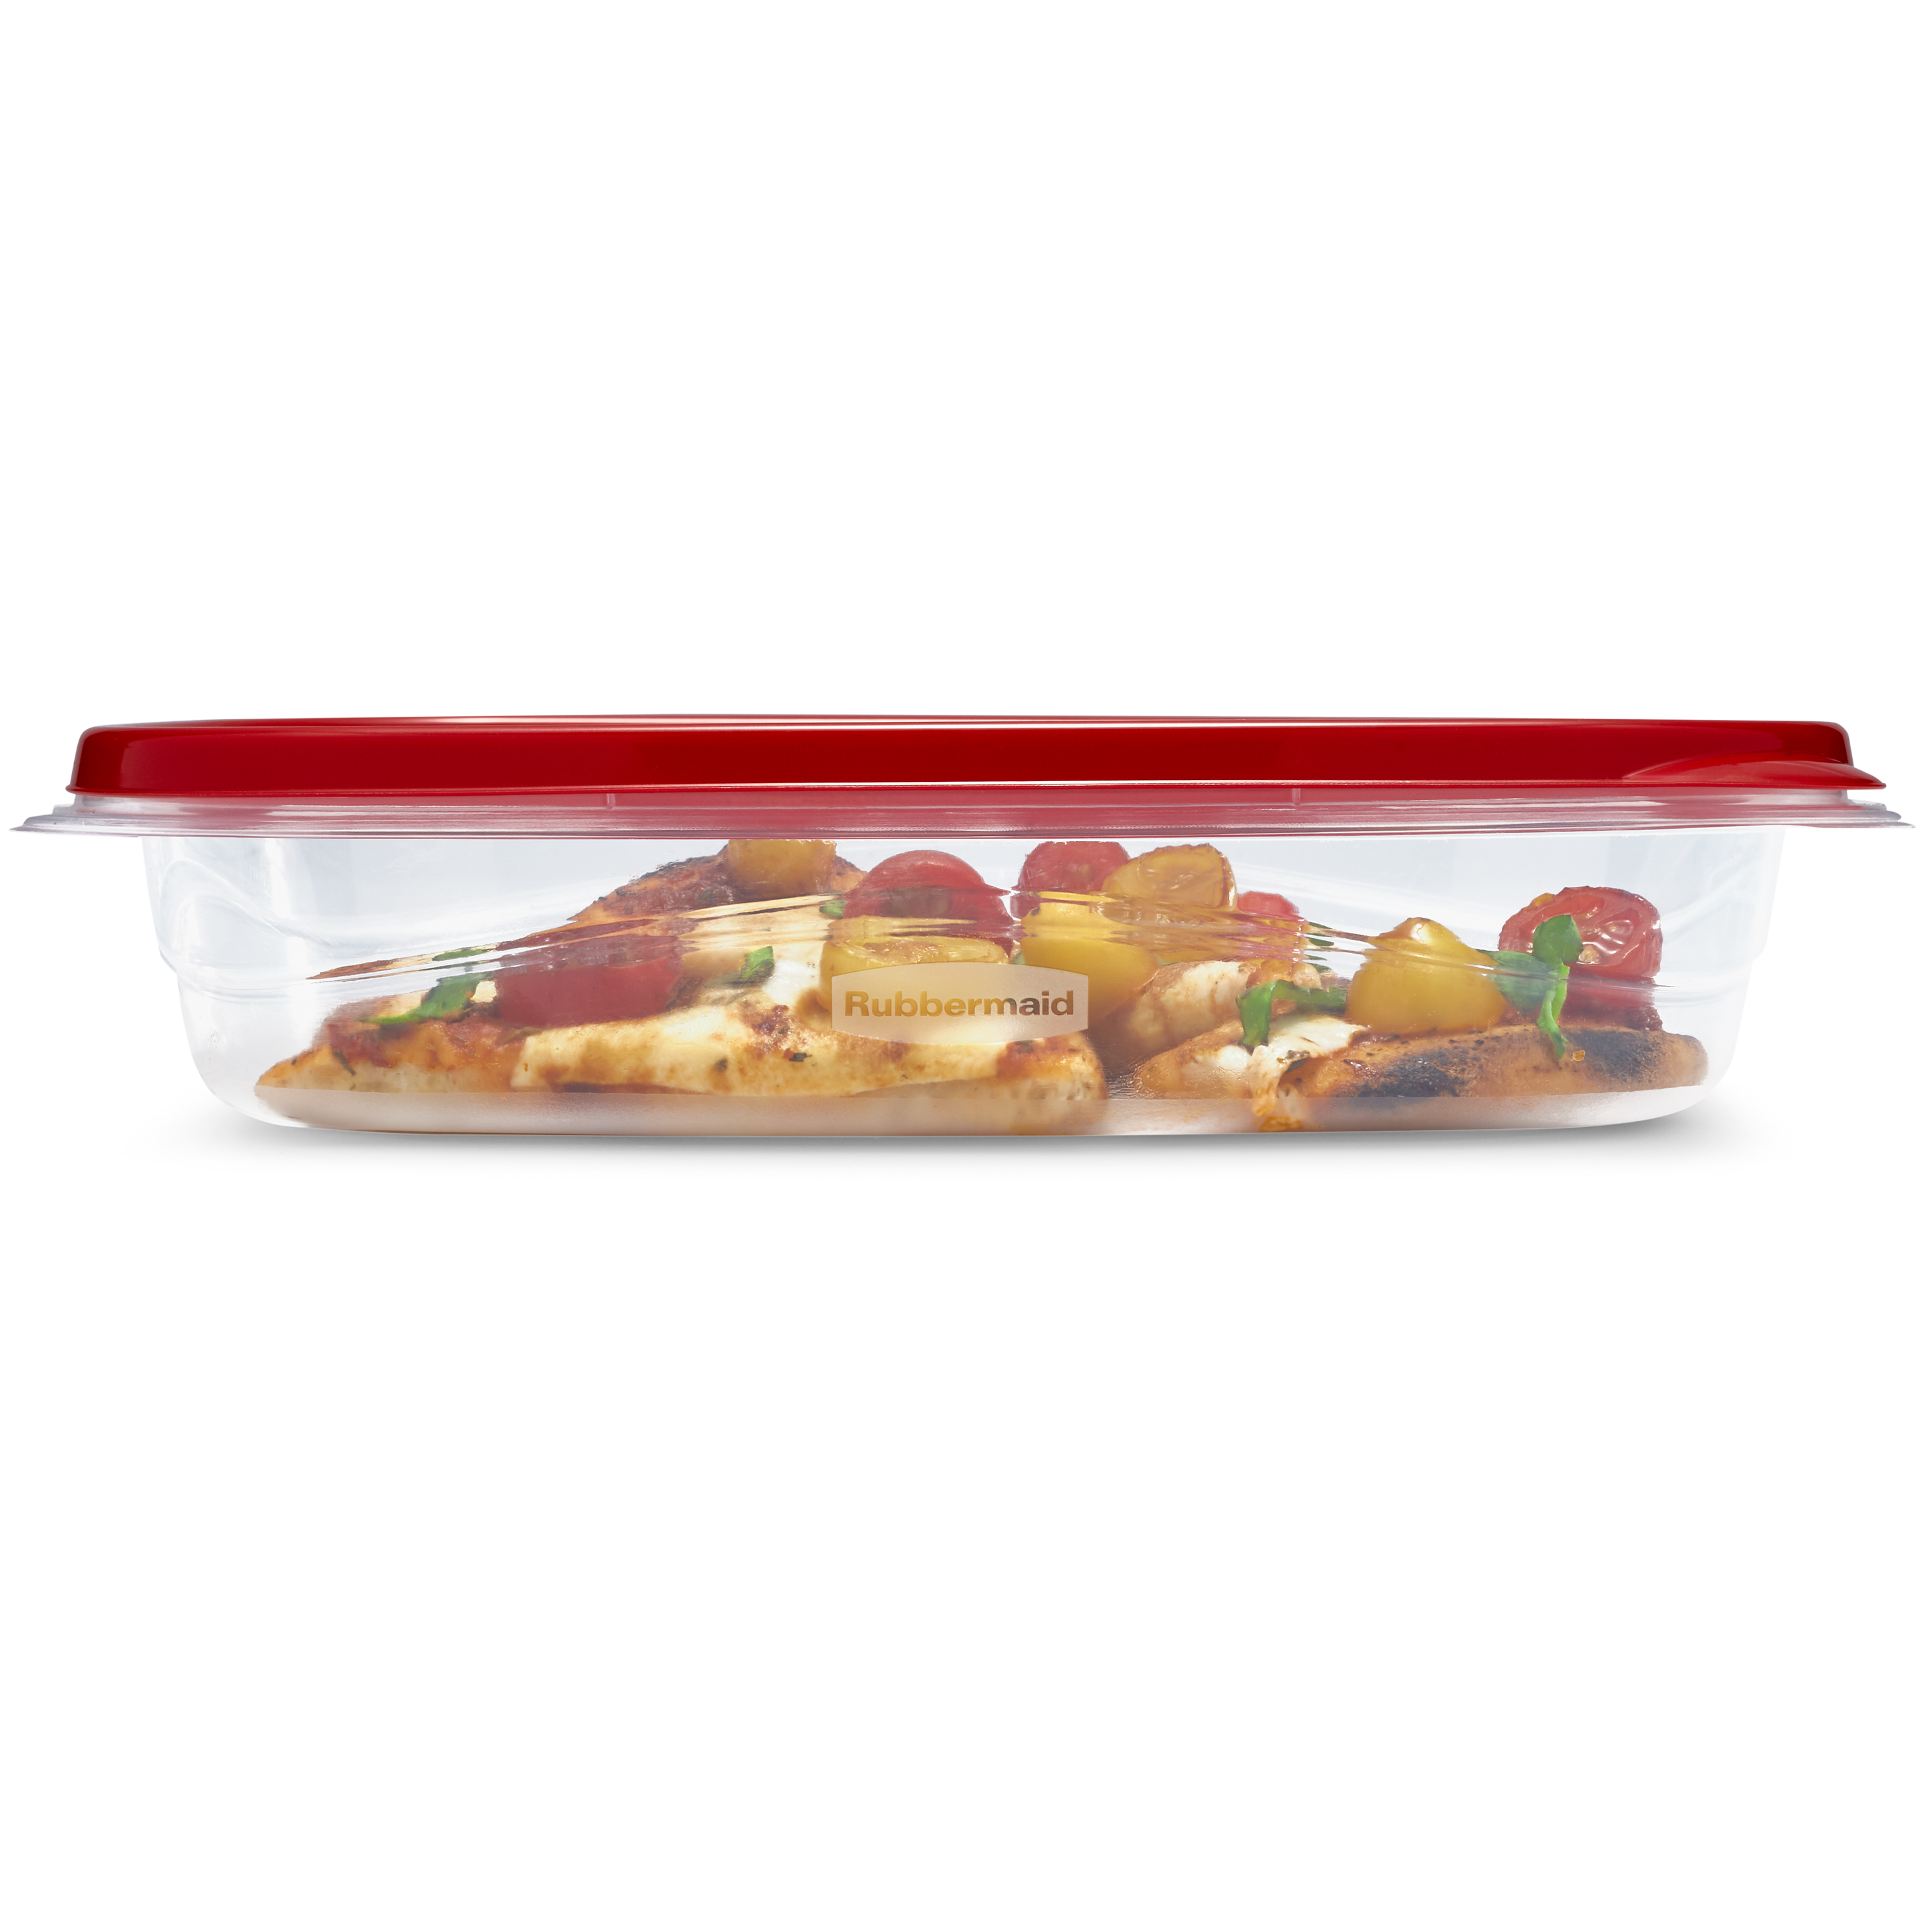 Rubbermaid TakeAlongs 4 Cup Rectangle Food Storage Containers, Set of 3, Red - image 7 of 7